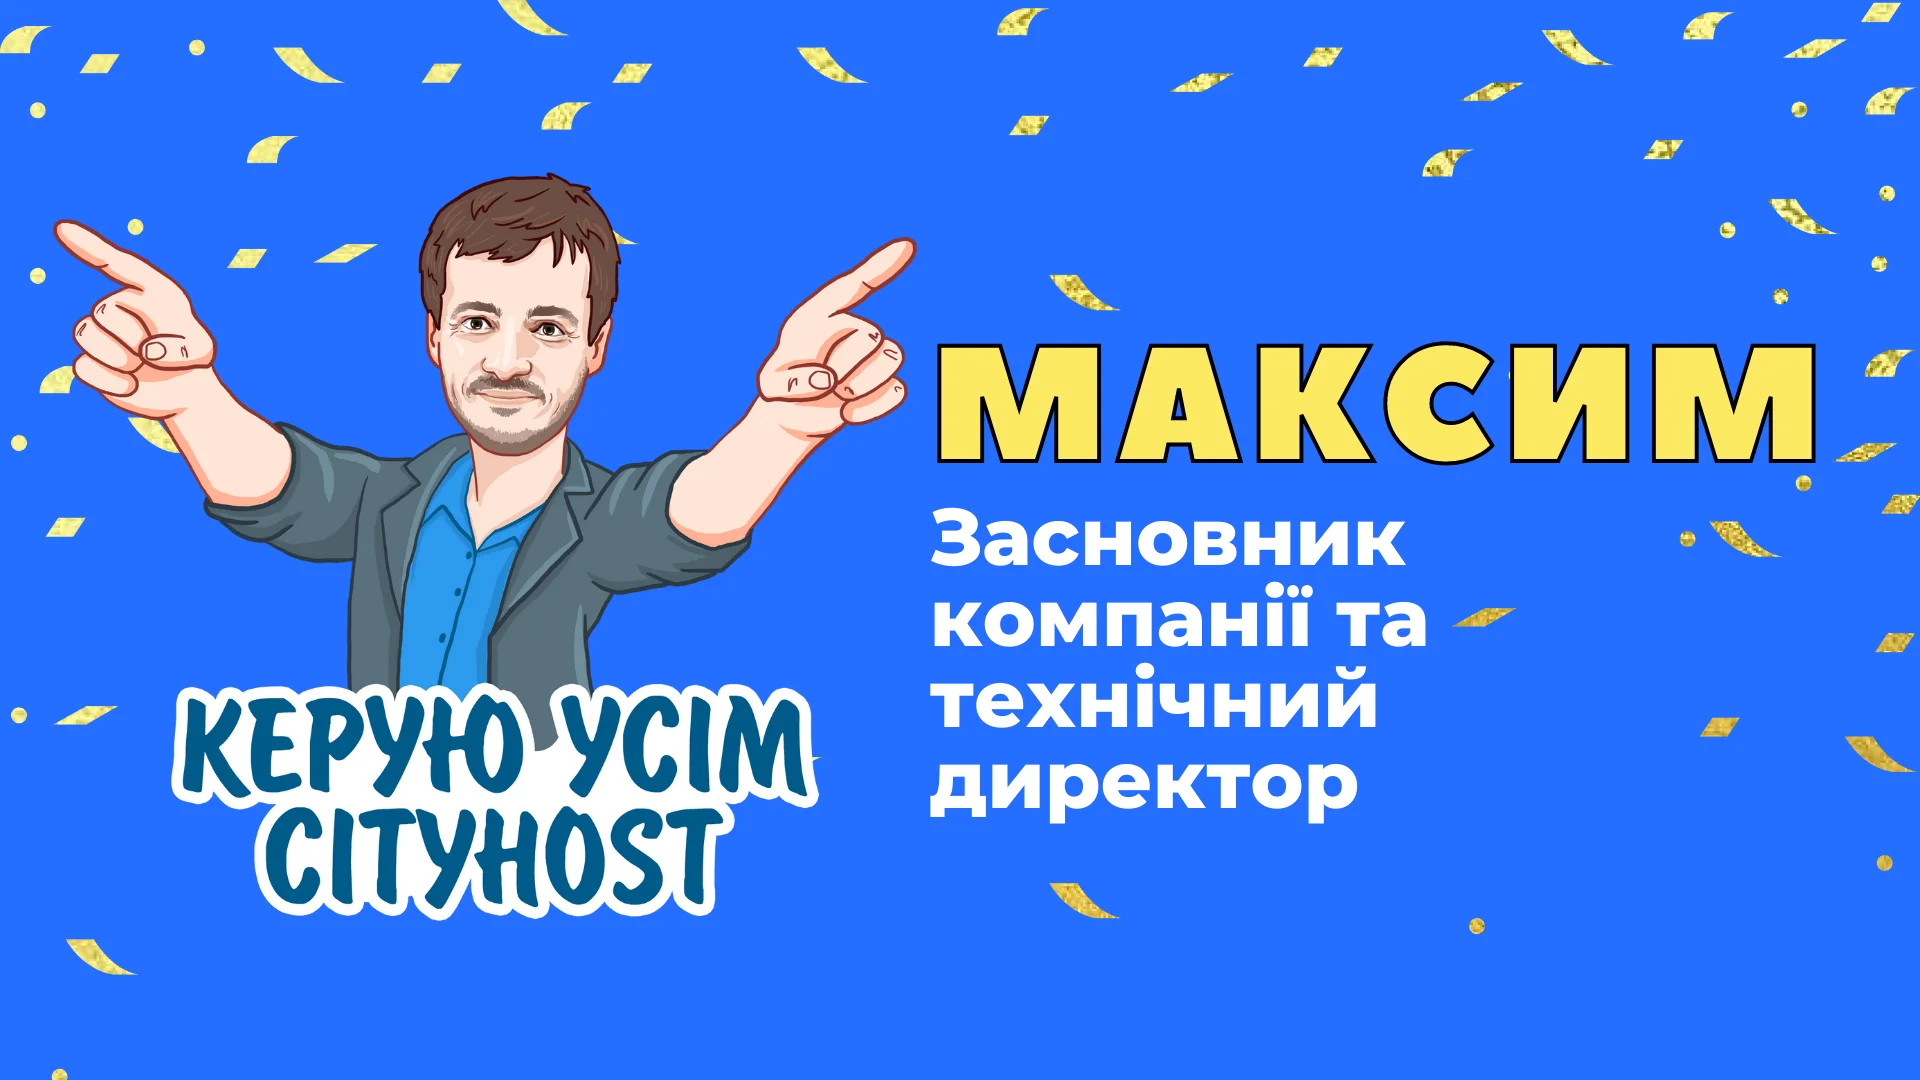 Maksym is the company's founder and technical director